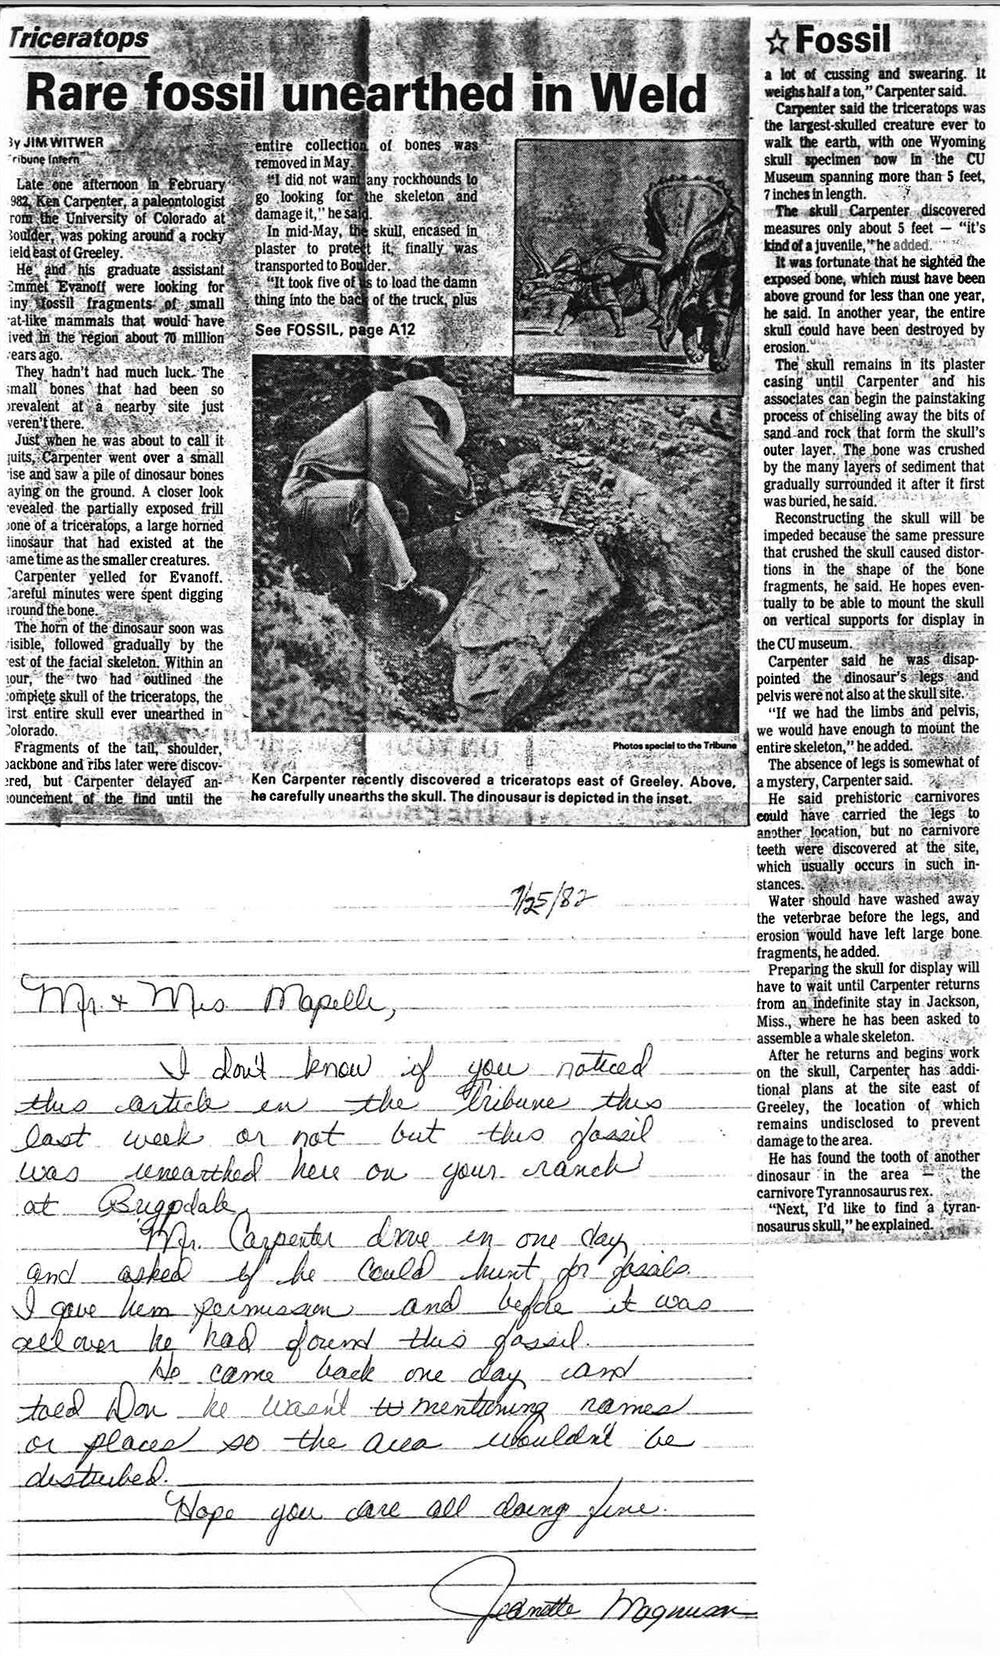 1982 Tribune Article And Magnuson Letter To Mapelli